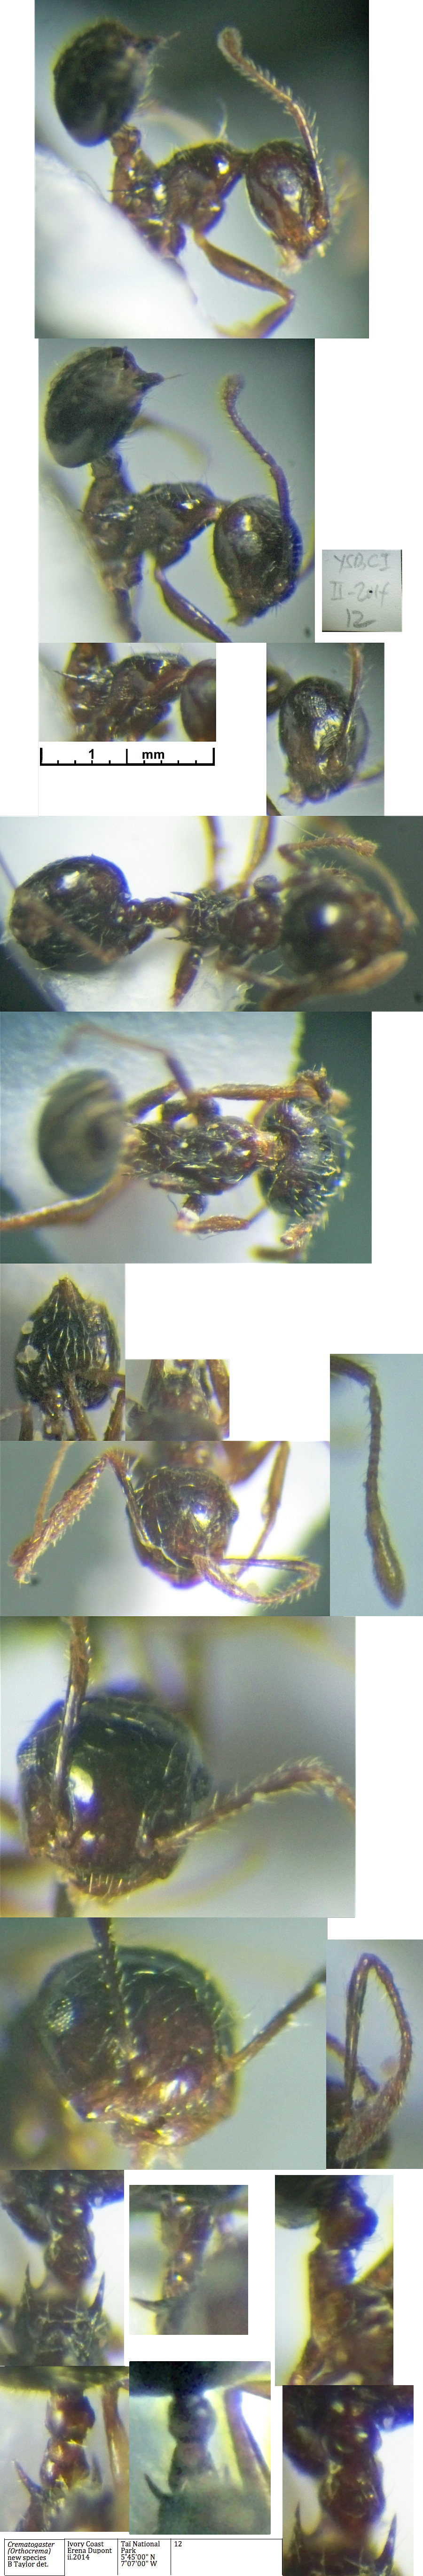 {Crematogaster (Orth.) new species Dupont}